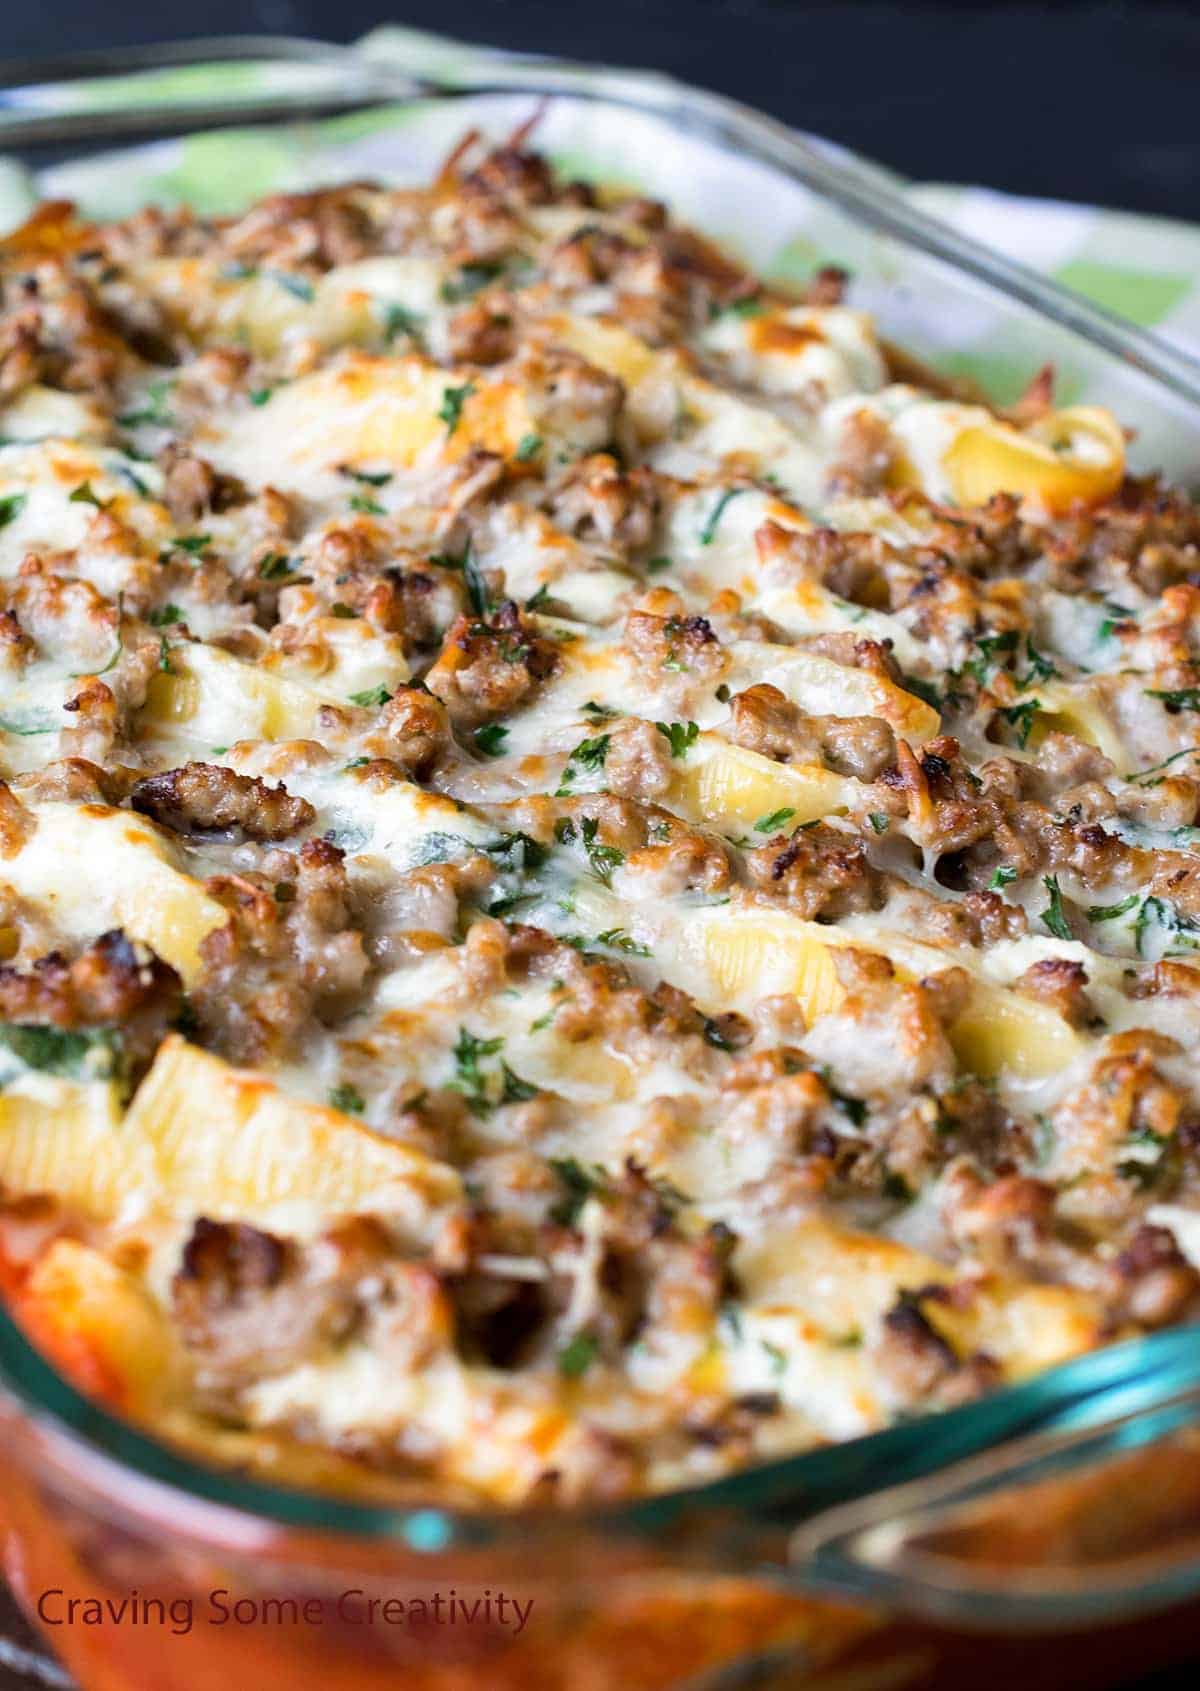 Baked Italian sausage stuffed pasta shells with ricotta and spinach in glass dish 